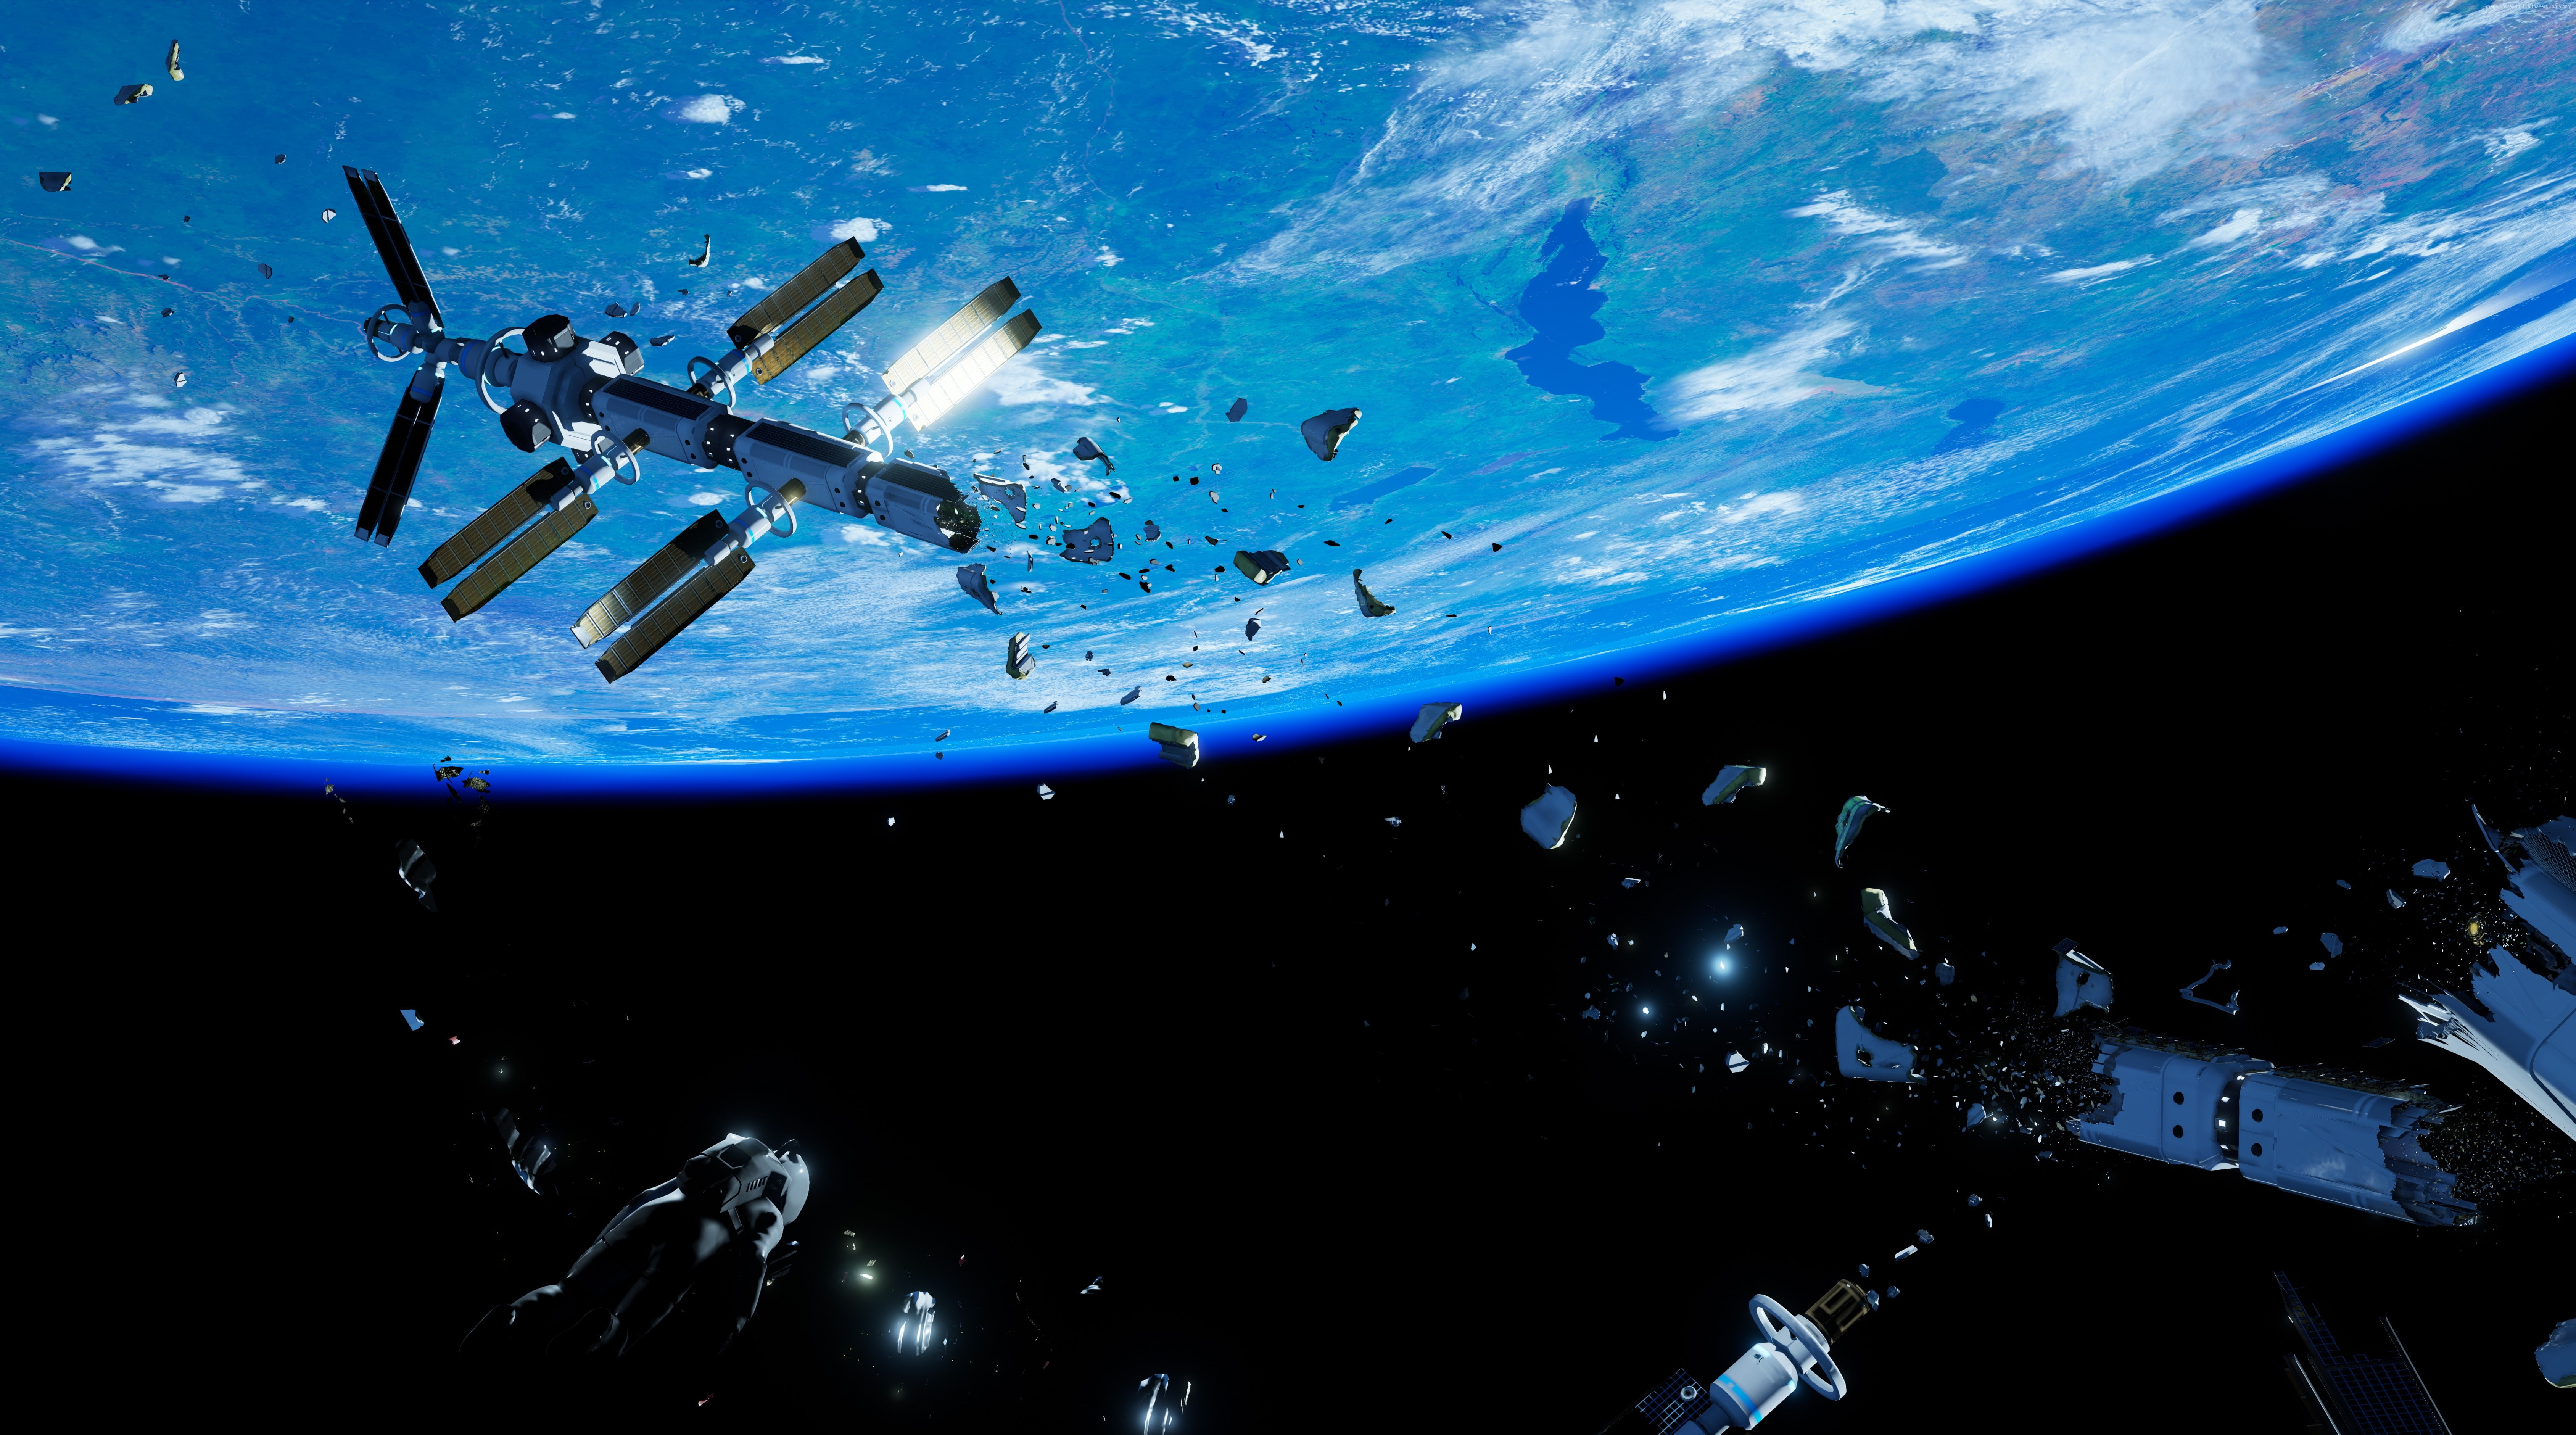 Xbox One, Adr1ft, space, VR, Oculus Rift, PS4